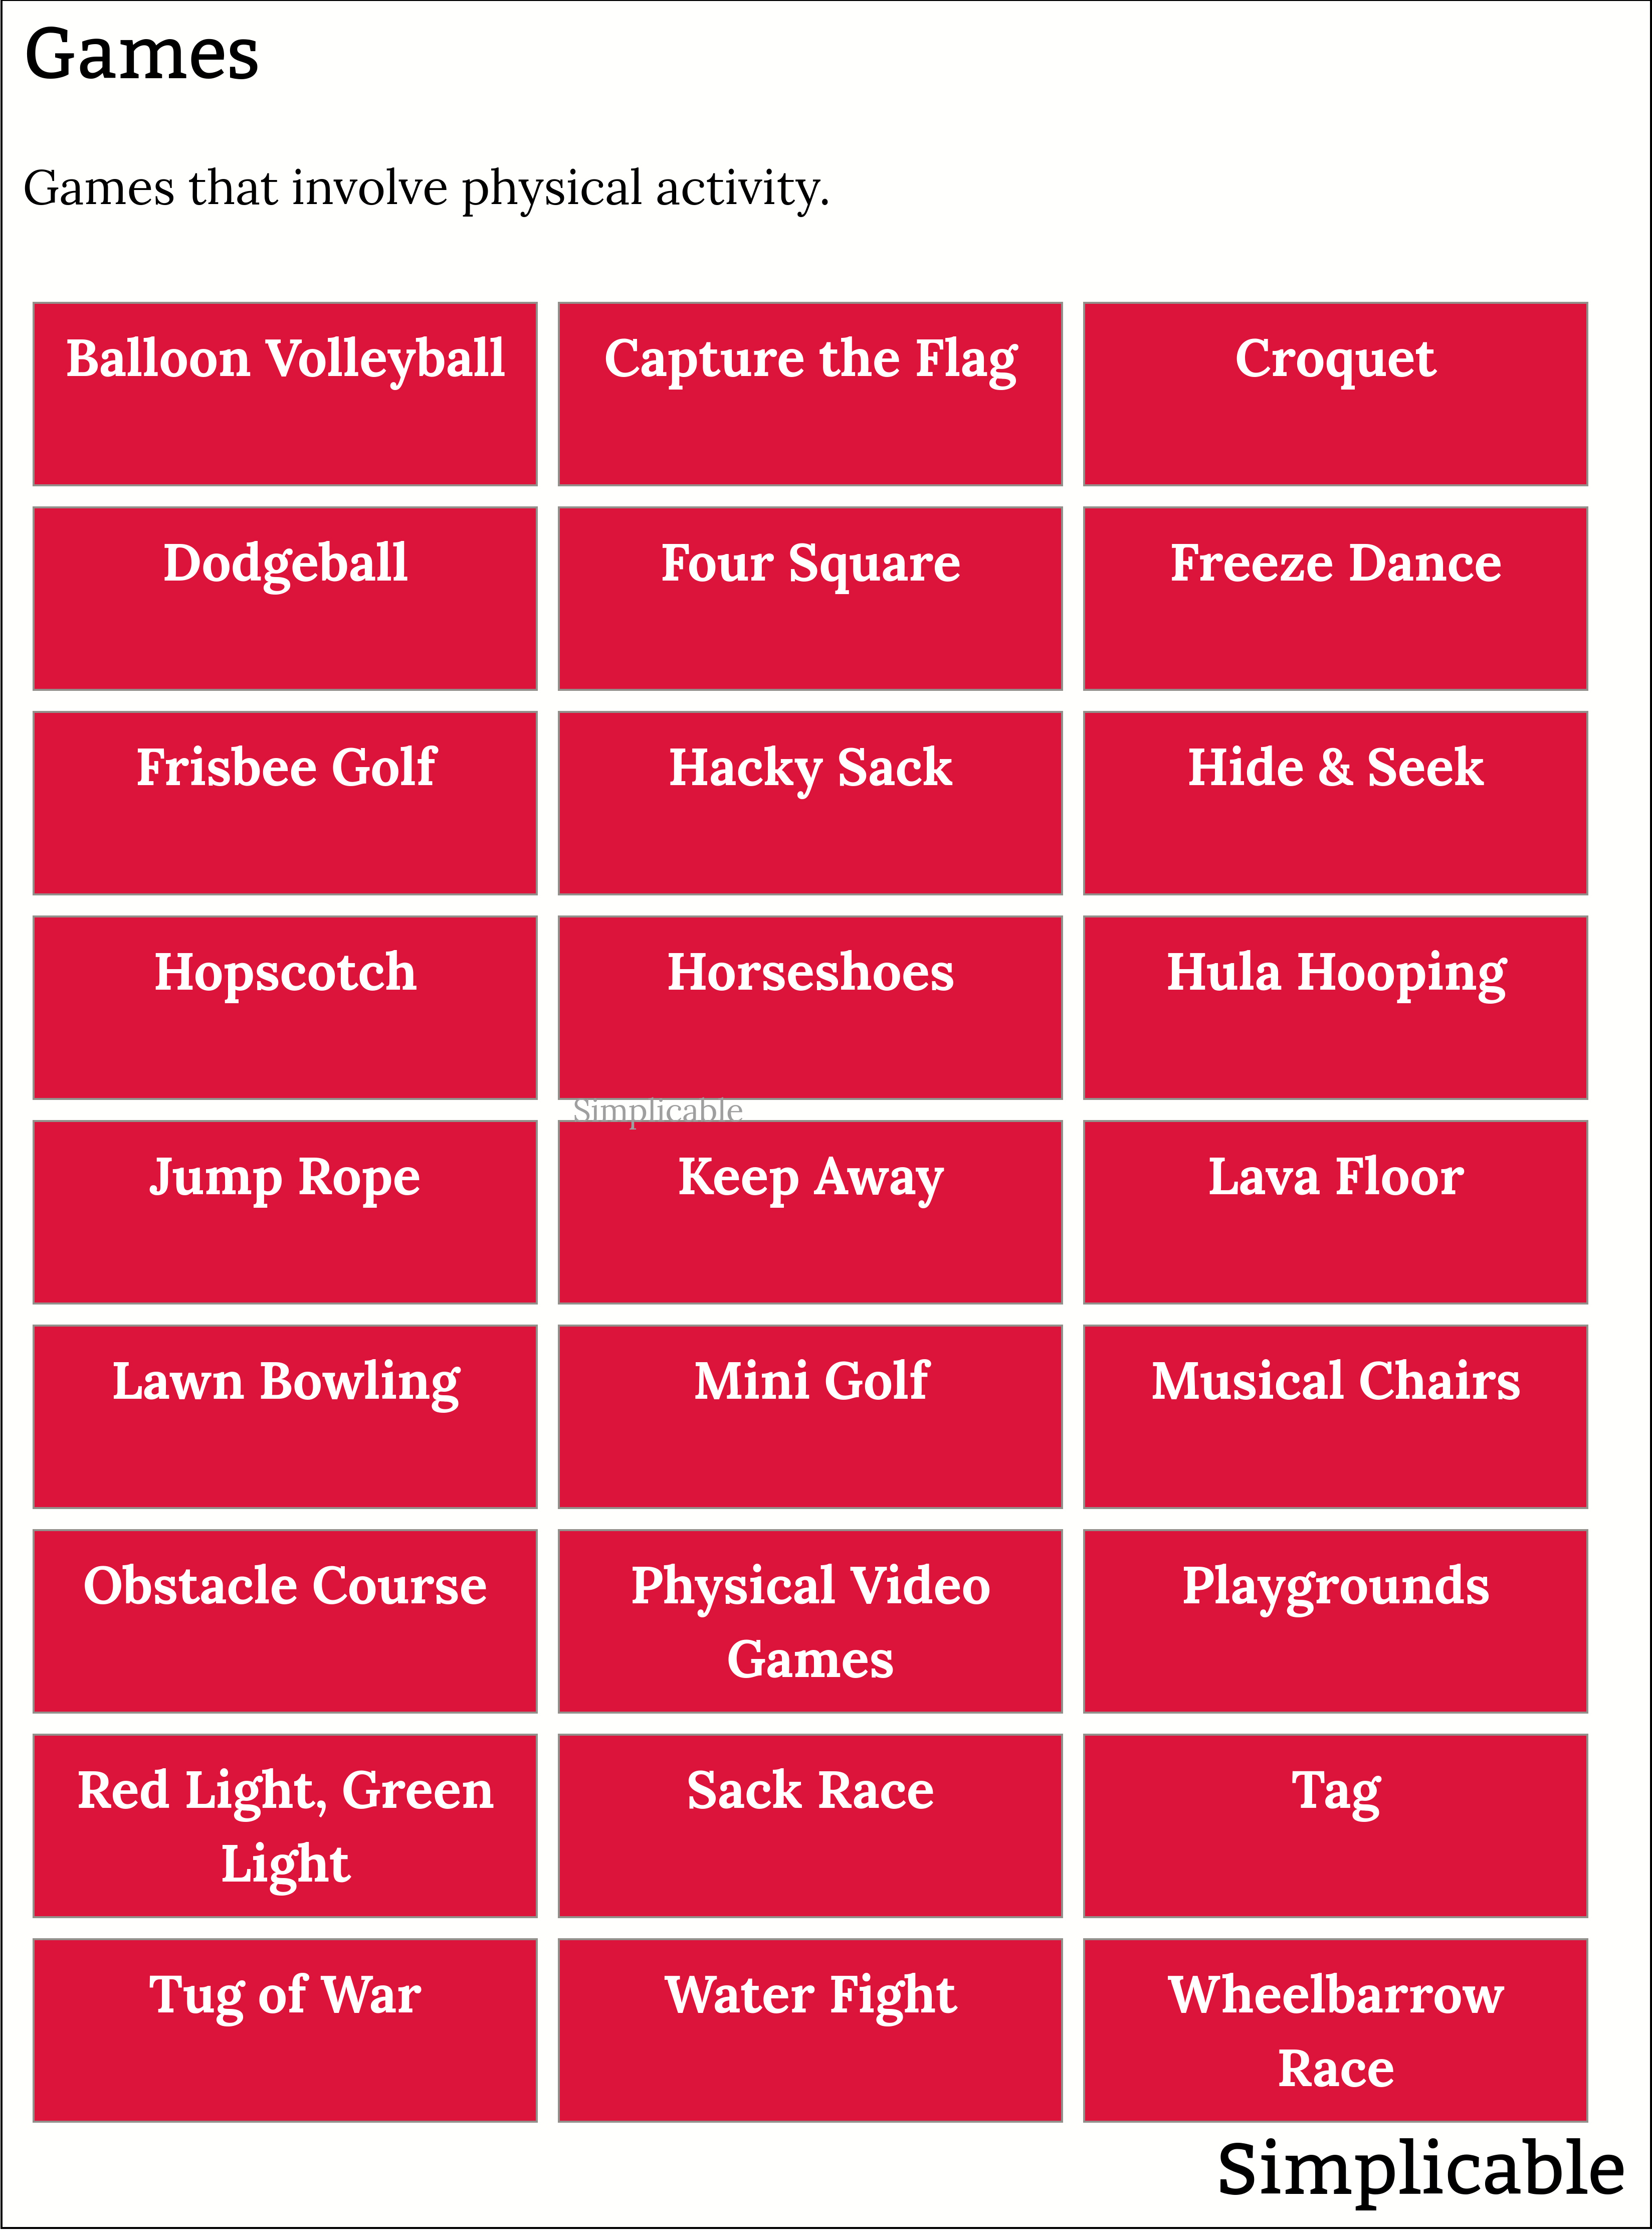 examples of games that involve physical activity